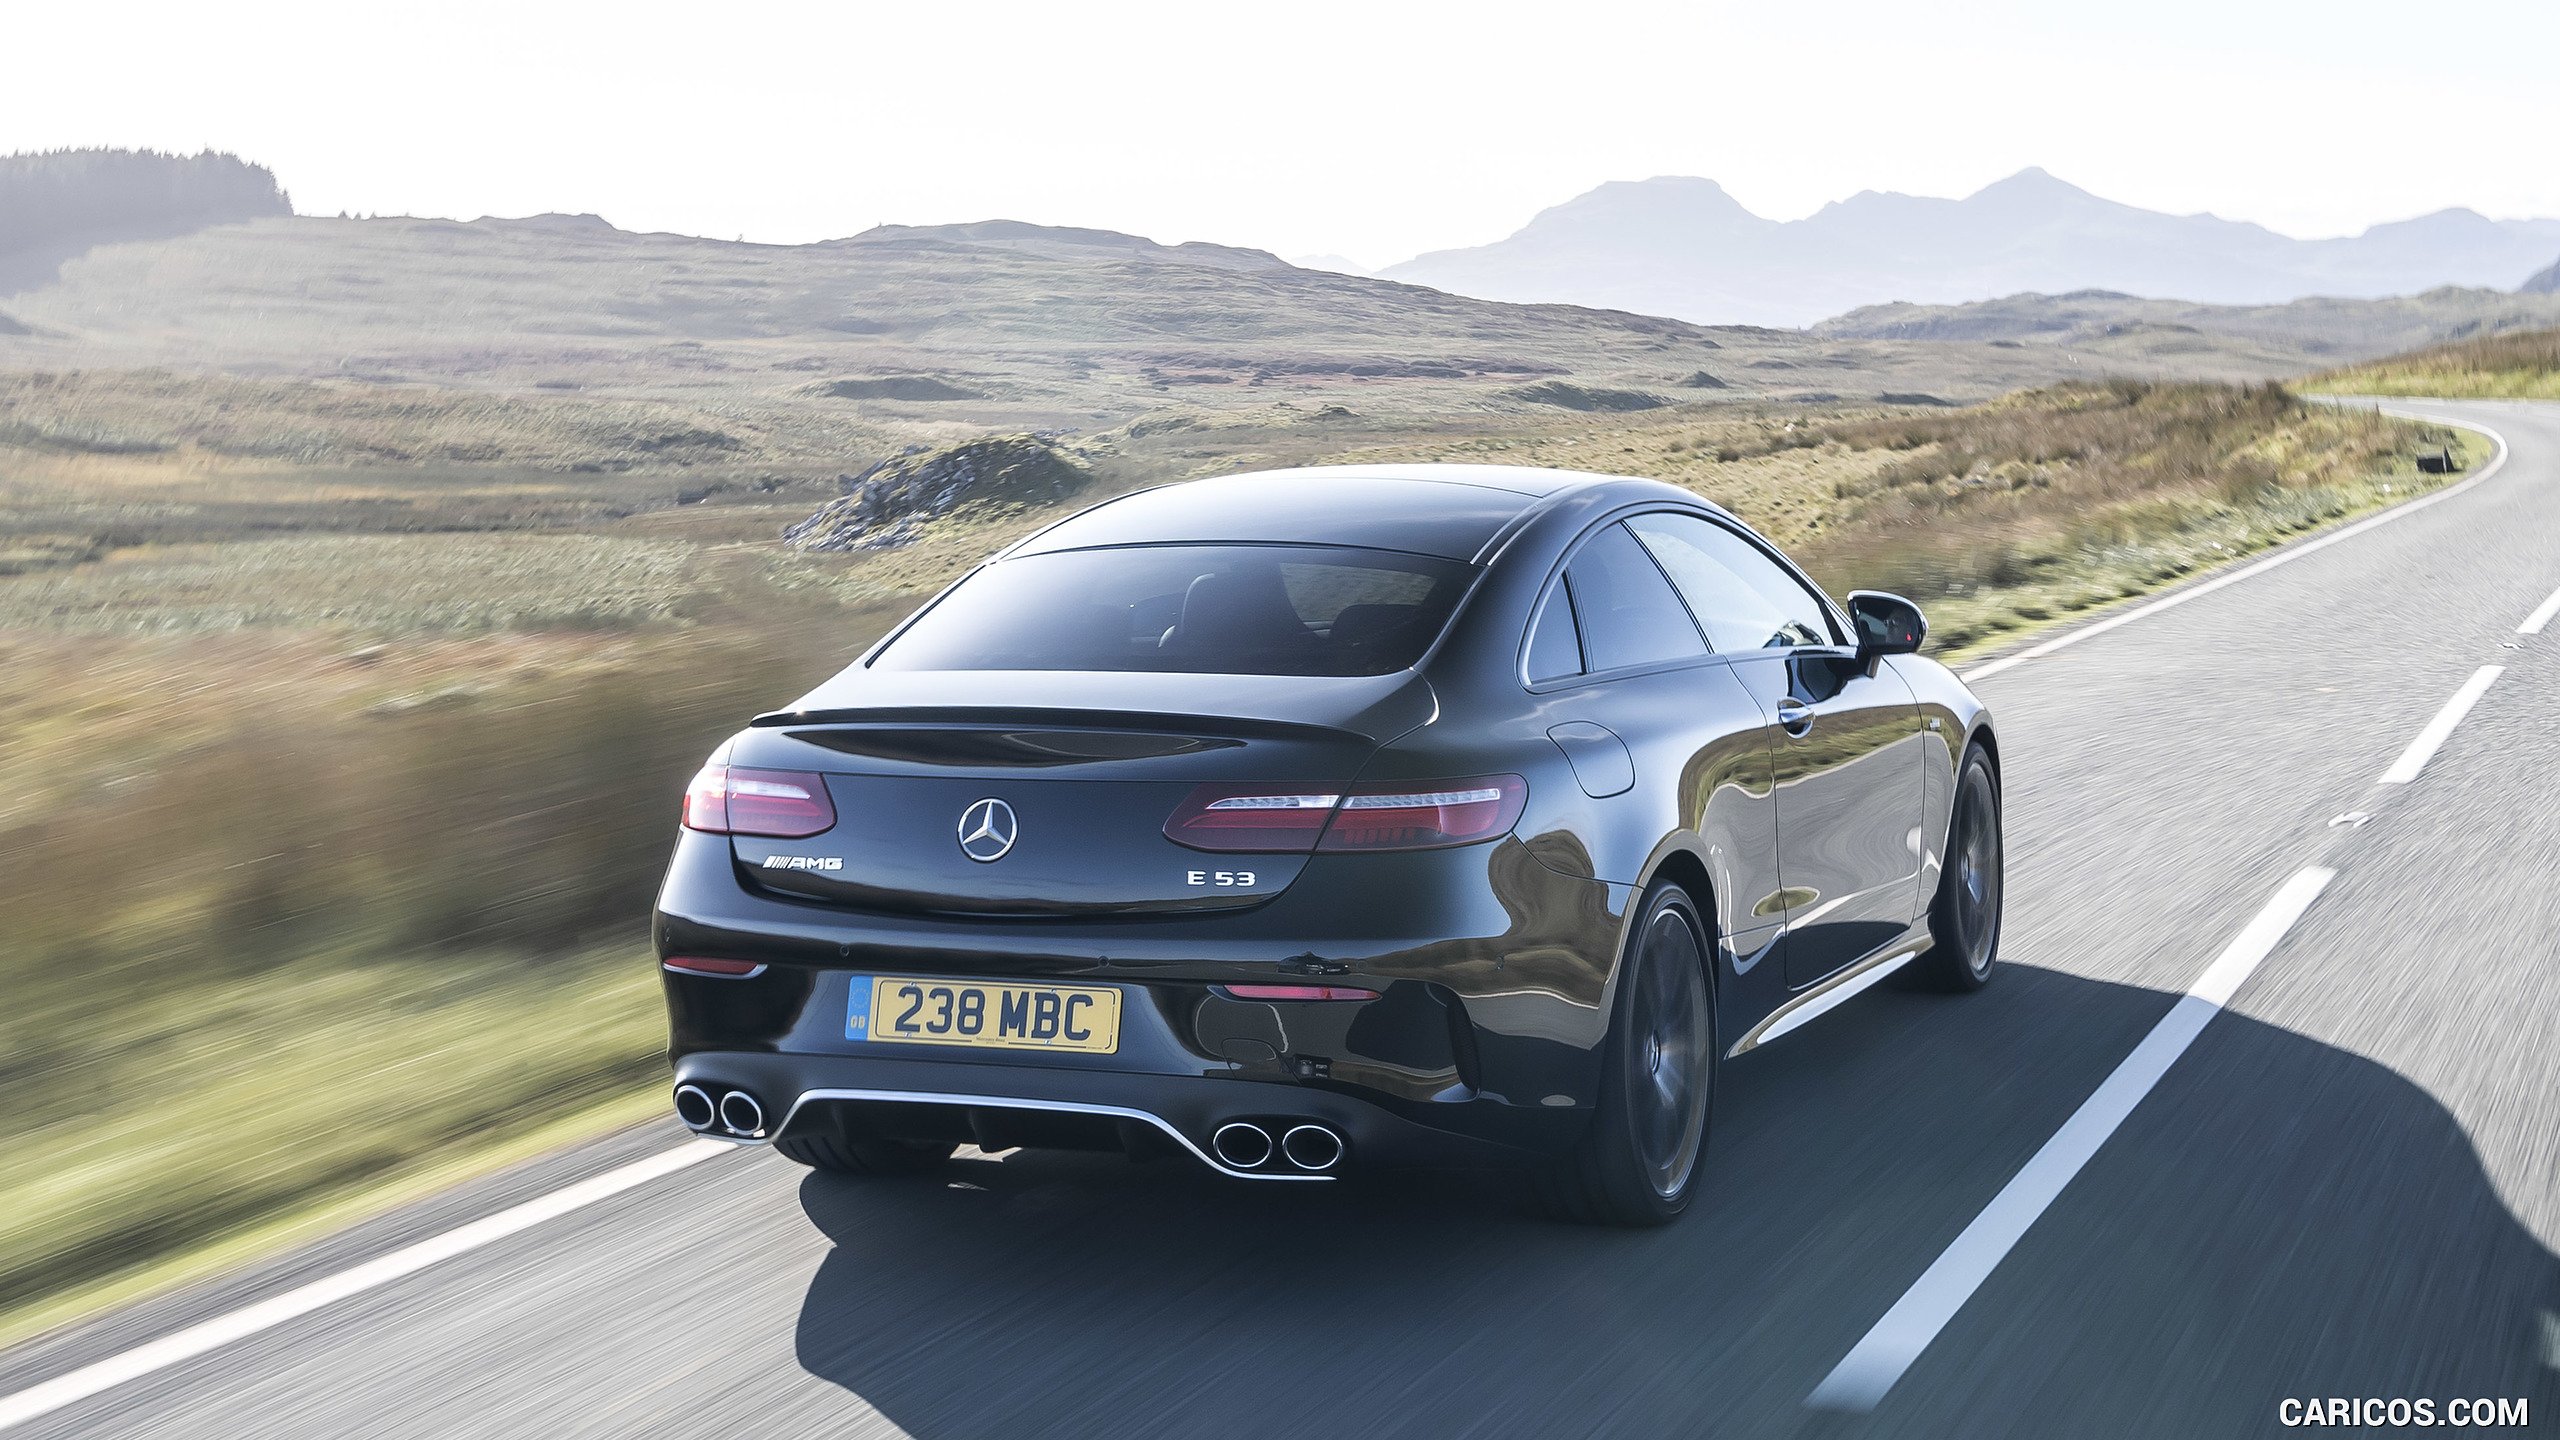 2019 Mercedes-AMG E 53 Coupe (UK-Spec) - Rear, #14 of 166